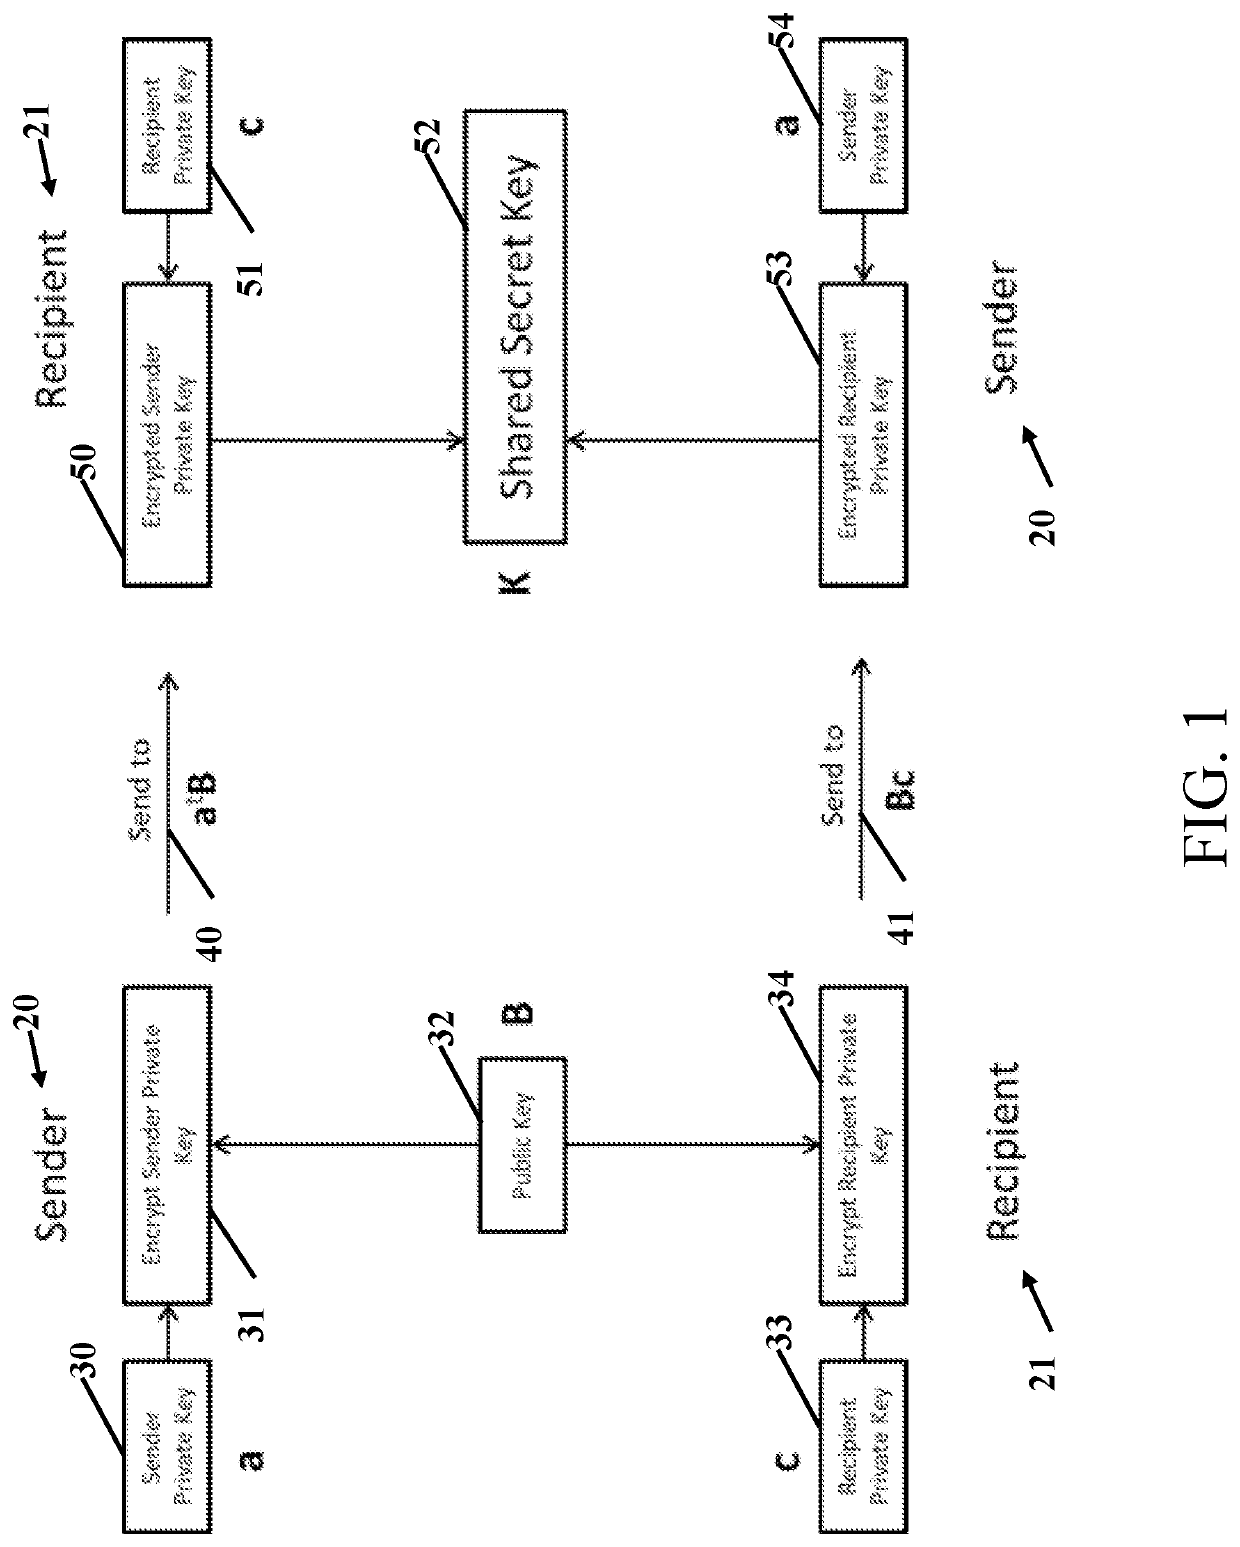 Quantum safe cryptography and advanced encryption and key exchange (AEKE) method for symmetric key encryption/exchange